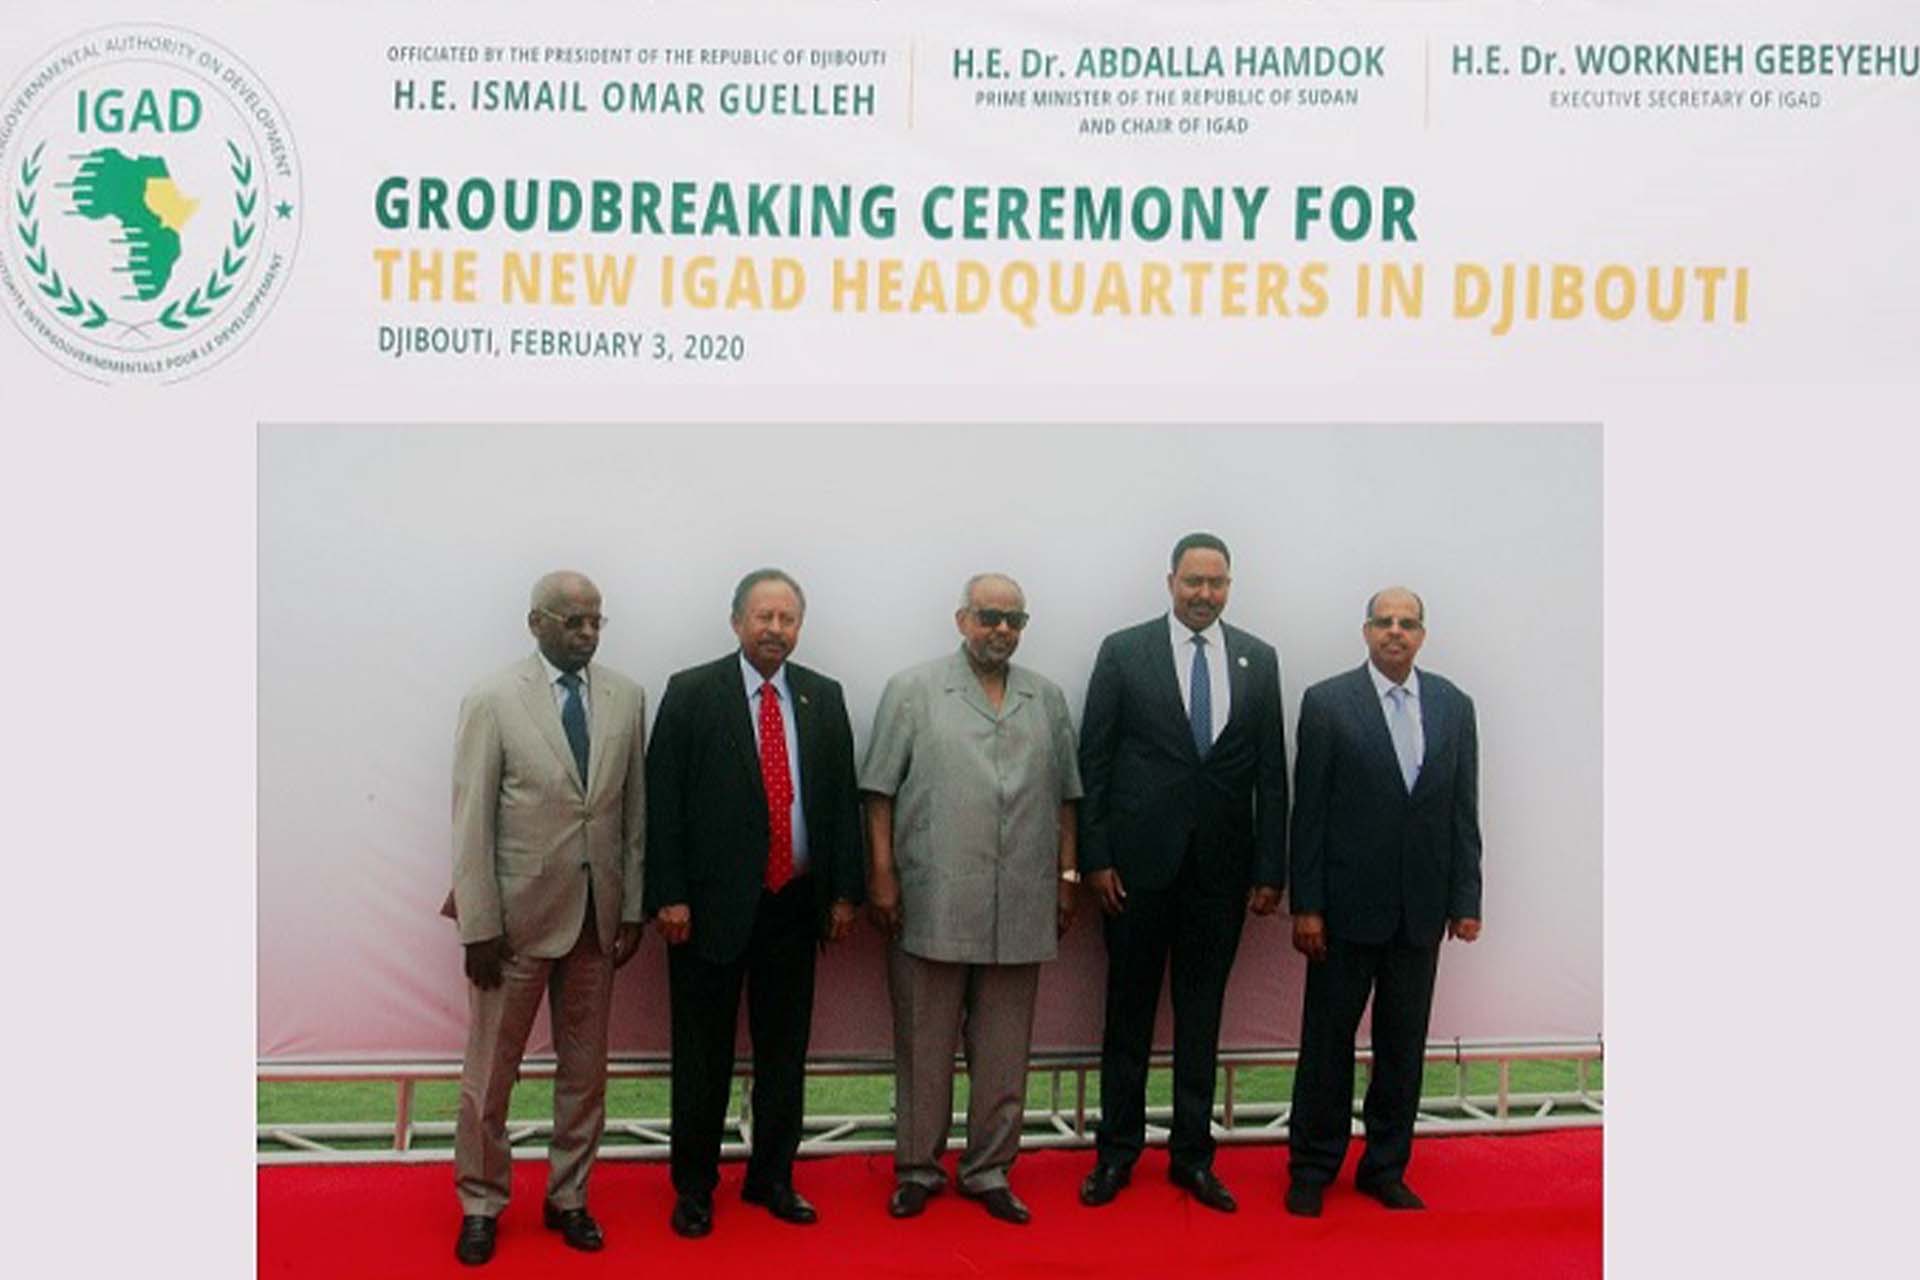 President Guelleh and PM Hamdok Break the Ground for  IGAD New Headquarters in Djibouti